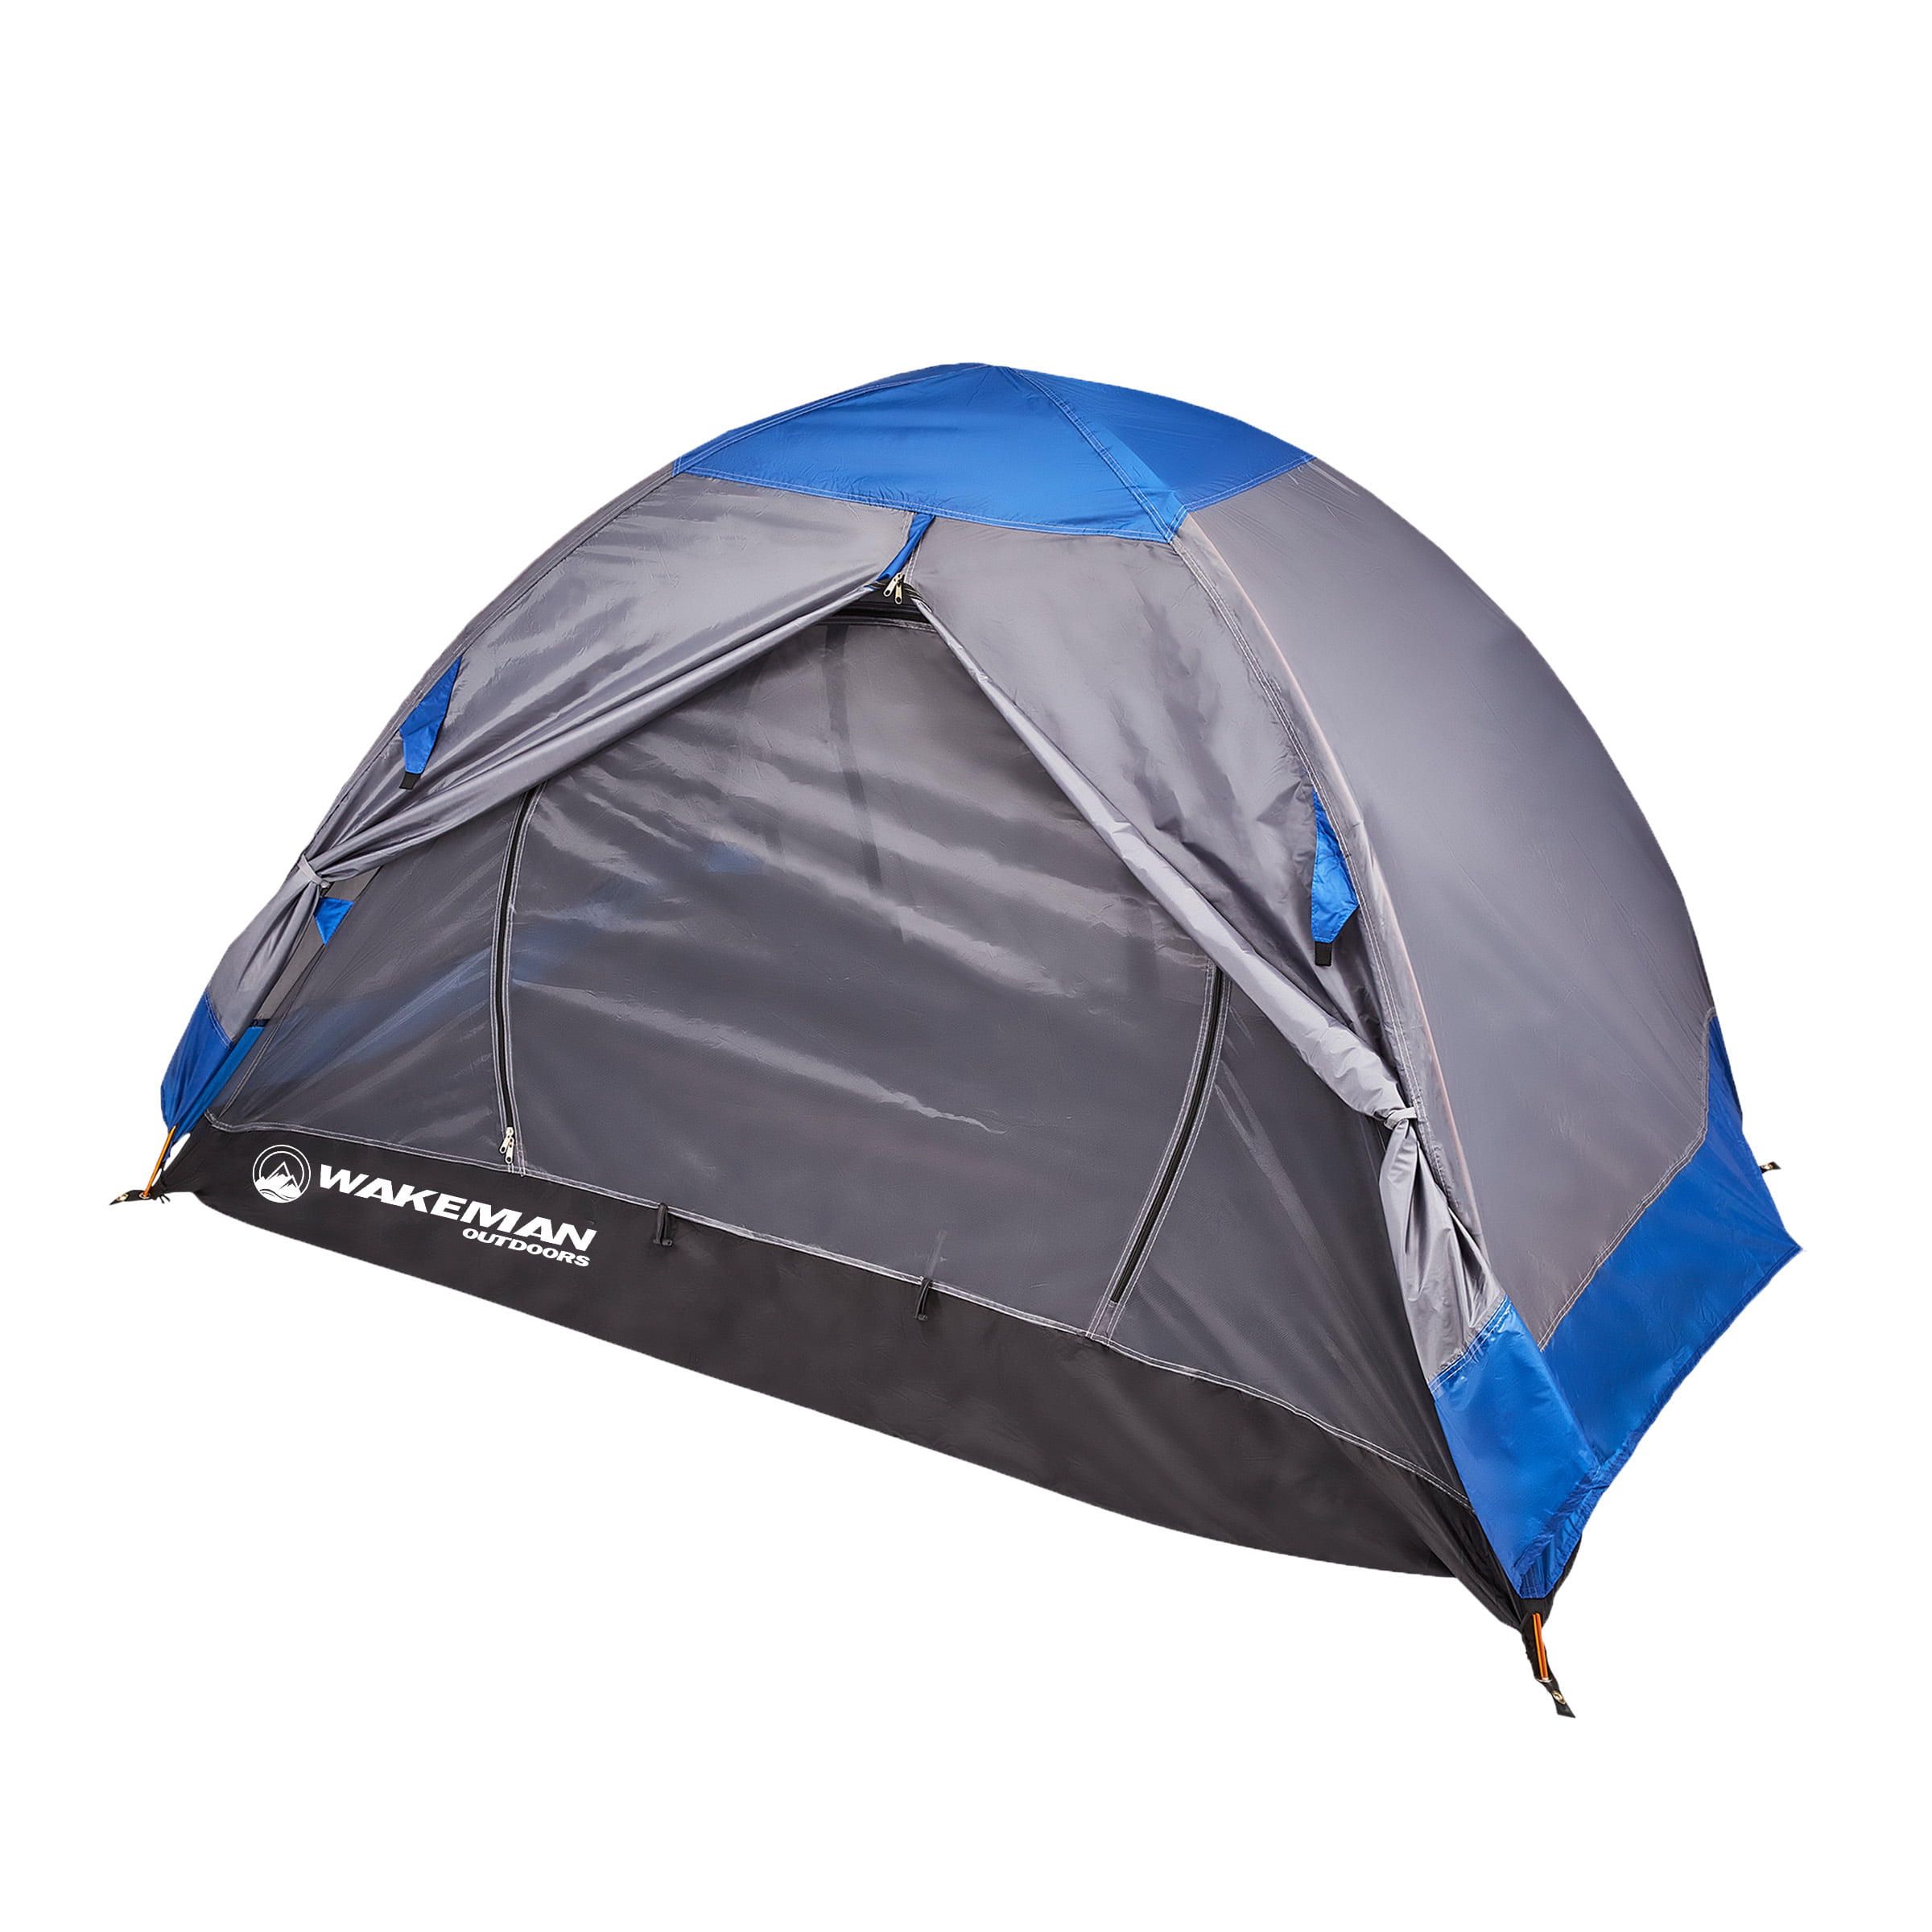 2 Person Double Layer Tent Camping or Festivals Blue 2 Man Fire Resistant NEW 